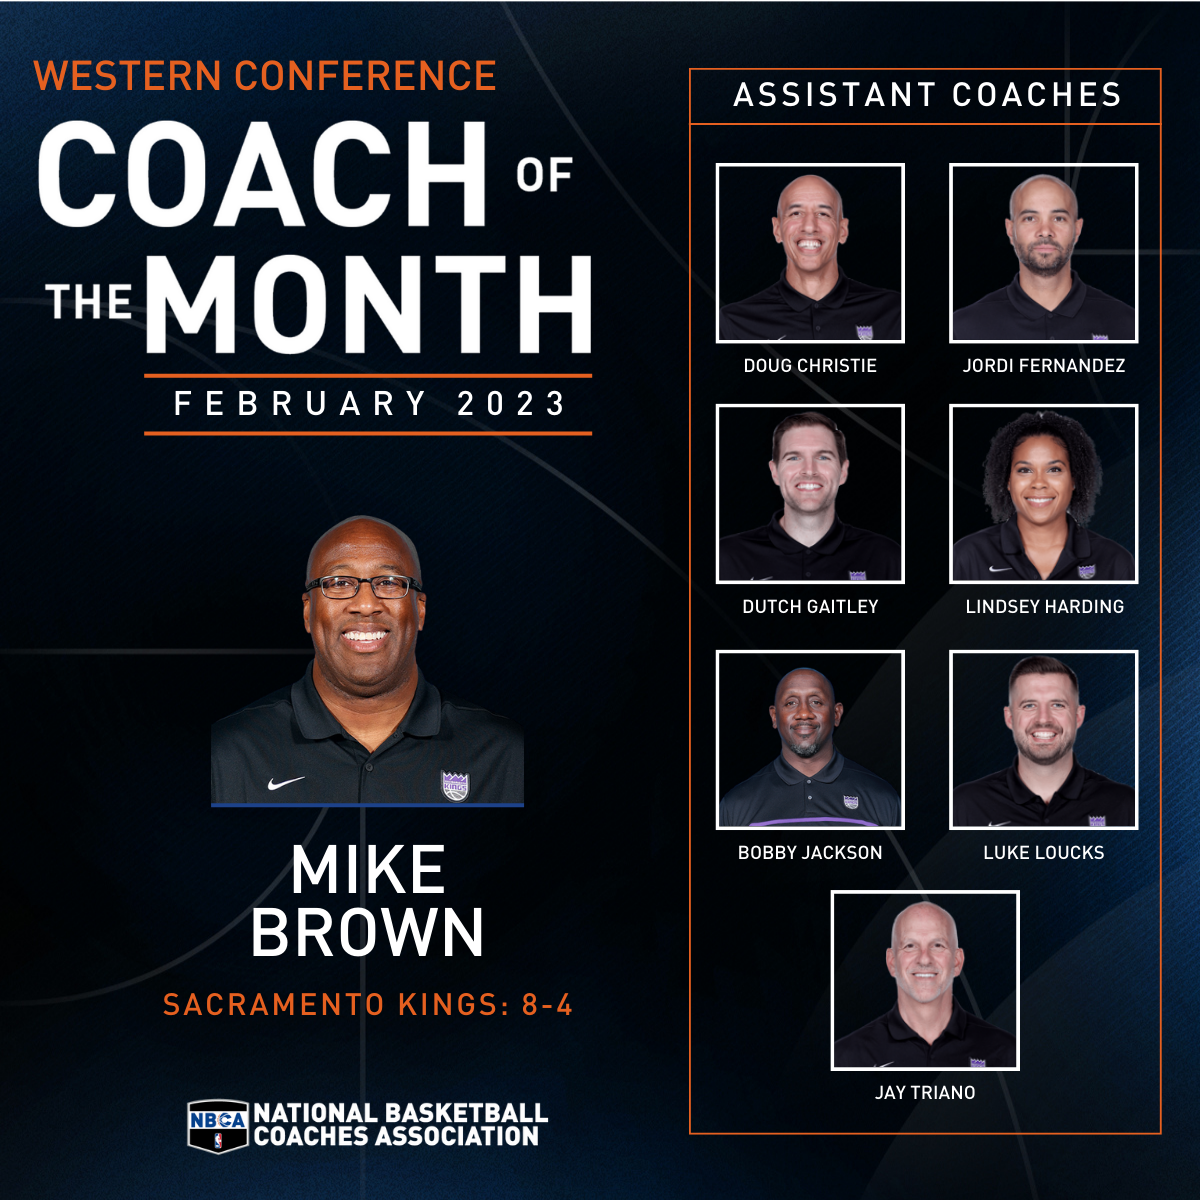 Mike Brown and Sacramento Kings Staff Win Western Conference Coach of